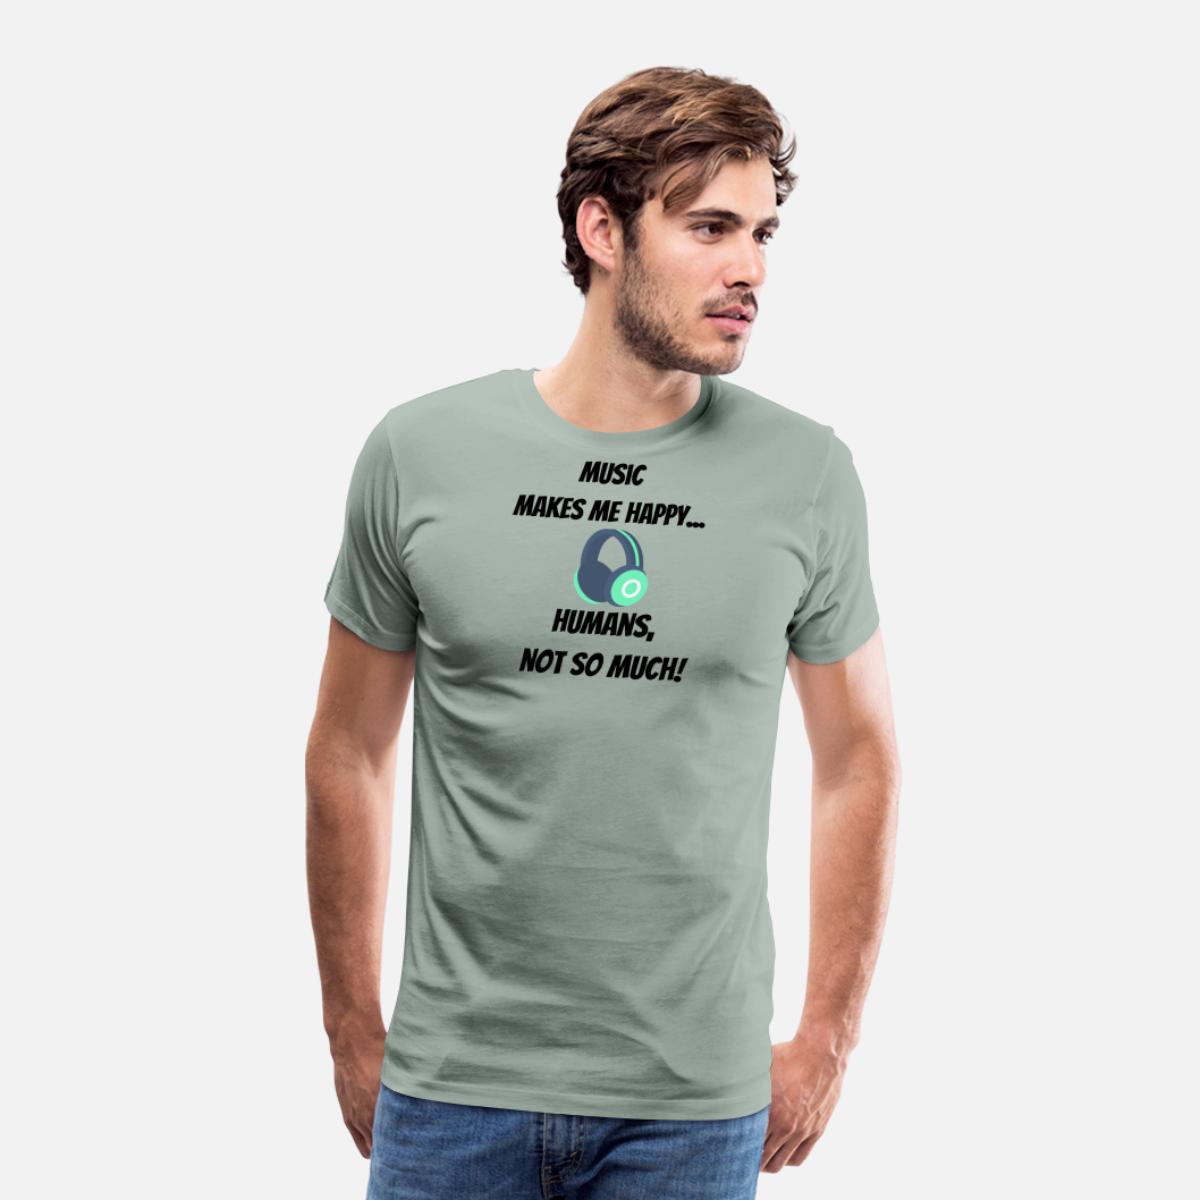 Men’s Premium T-Shirt Music makes me happy... Humans not so much! by stine1